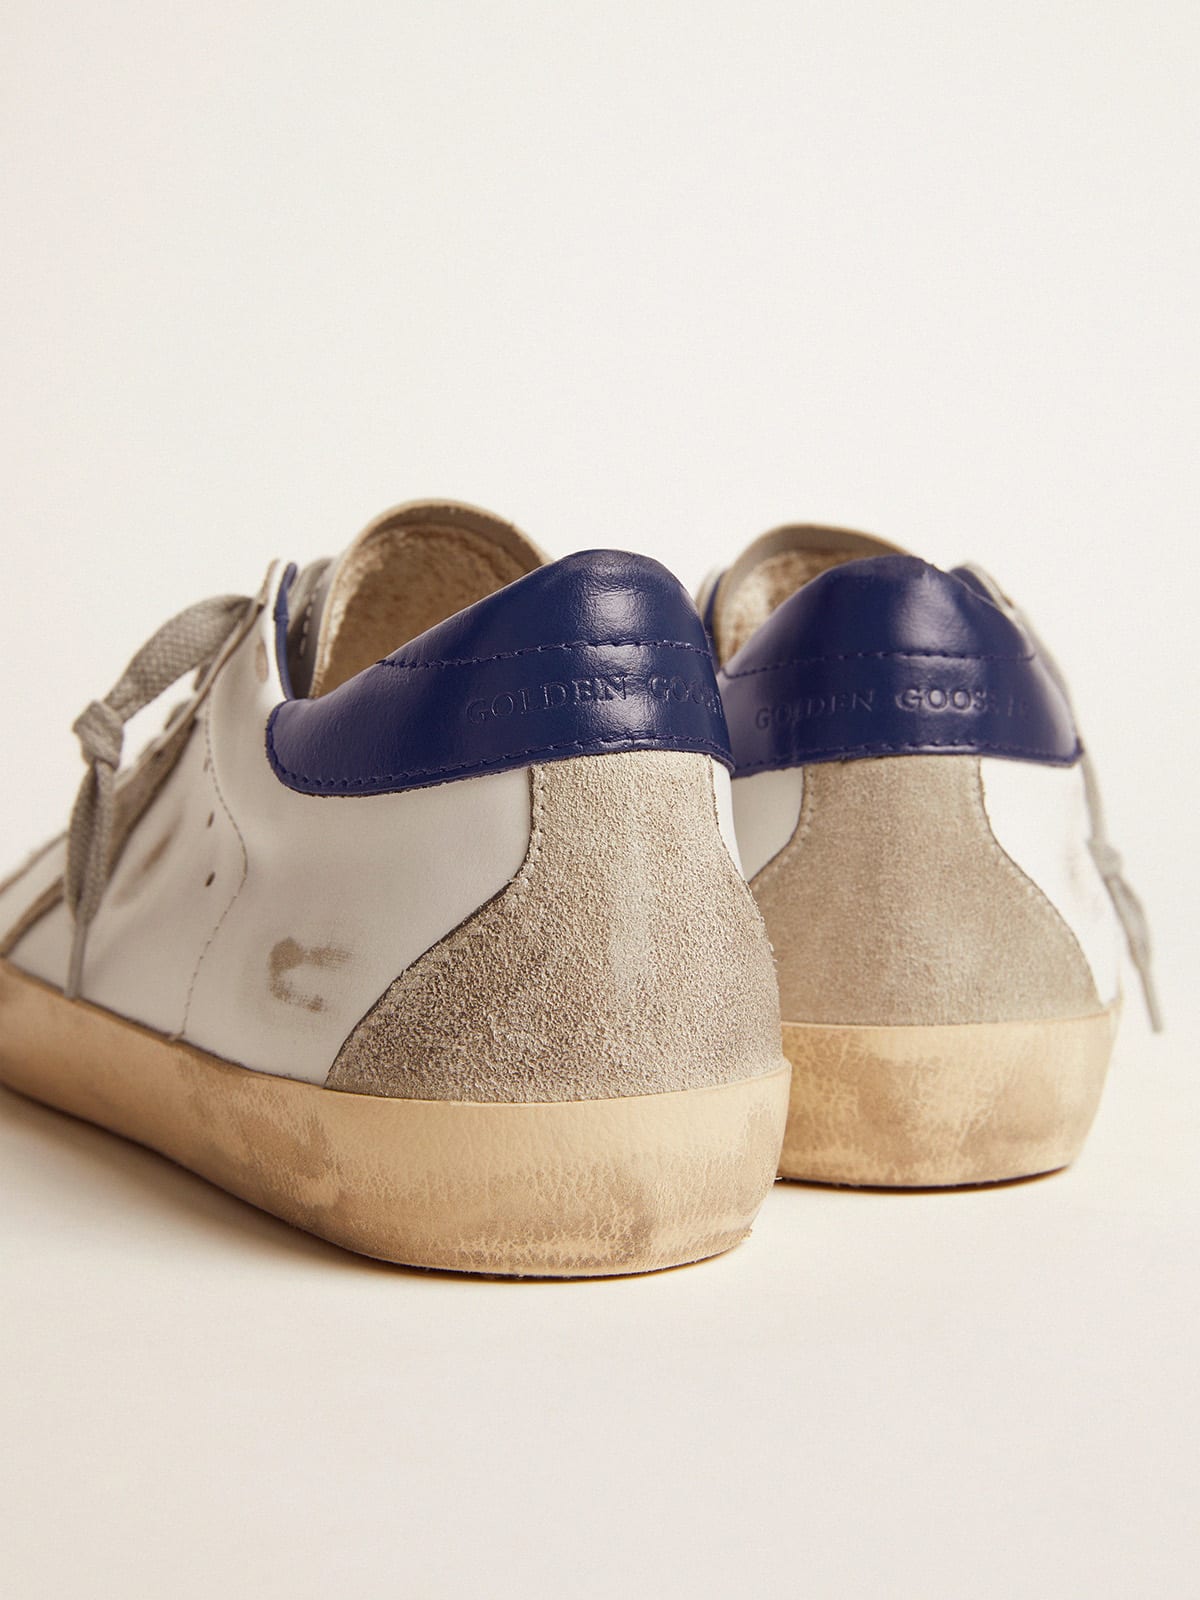 Golden Goose - Men’s Super-Star sneakers with suede star and blue heel tab in 